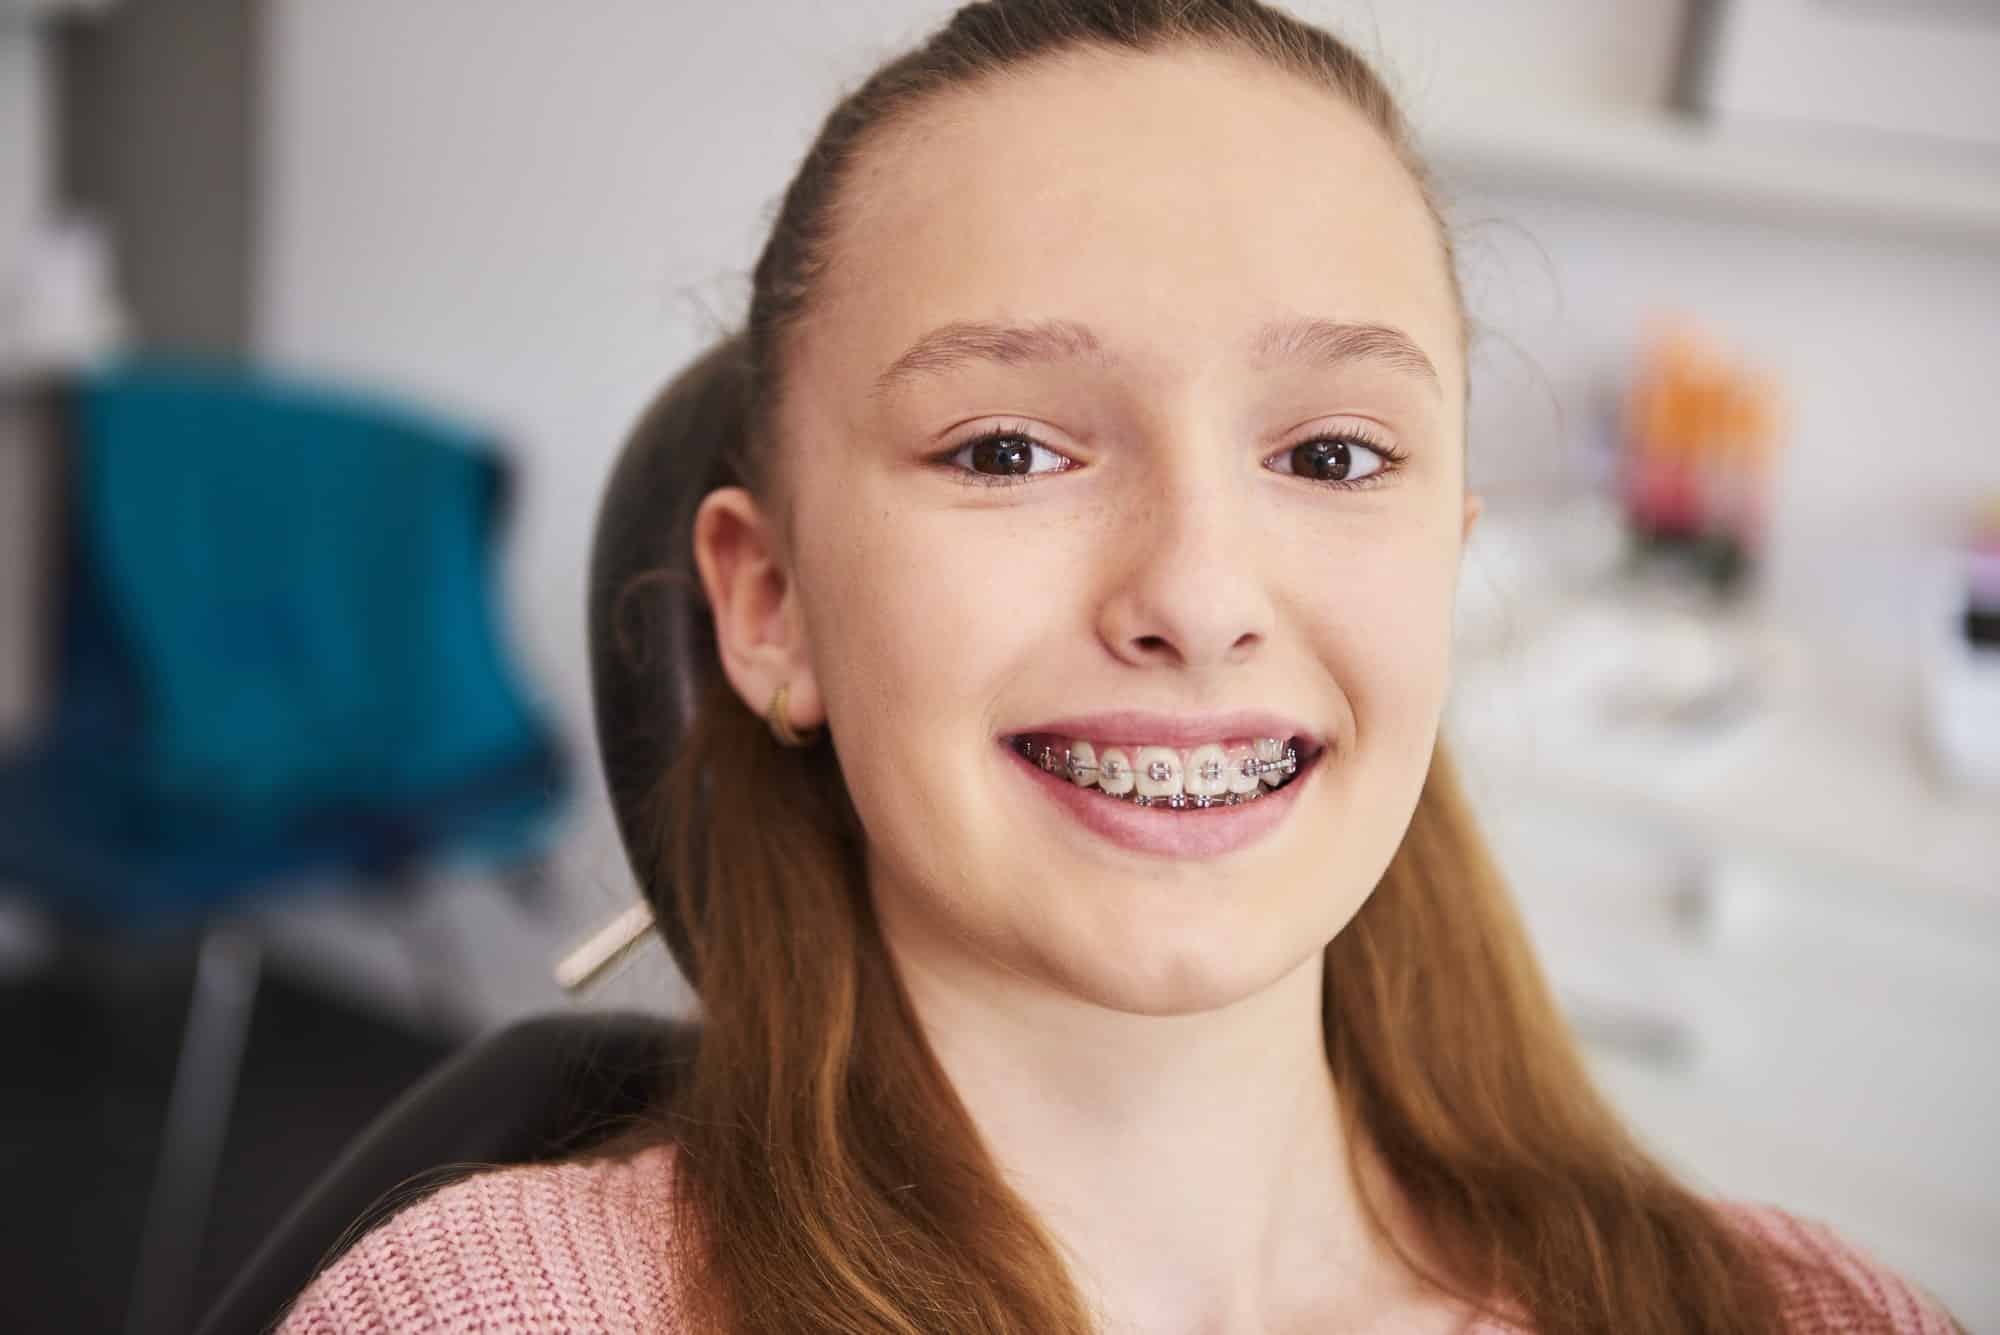 Portrait of smiling child with braces in dentist's office